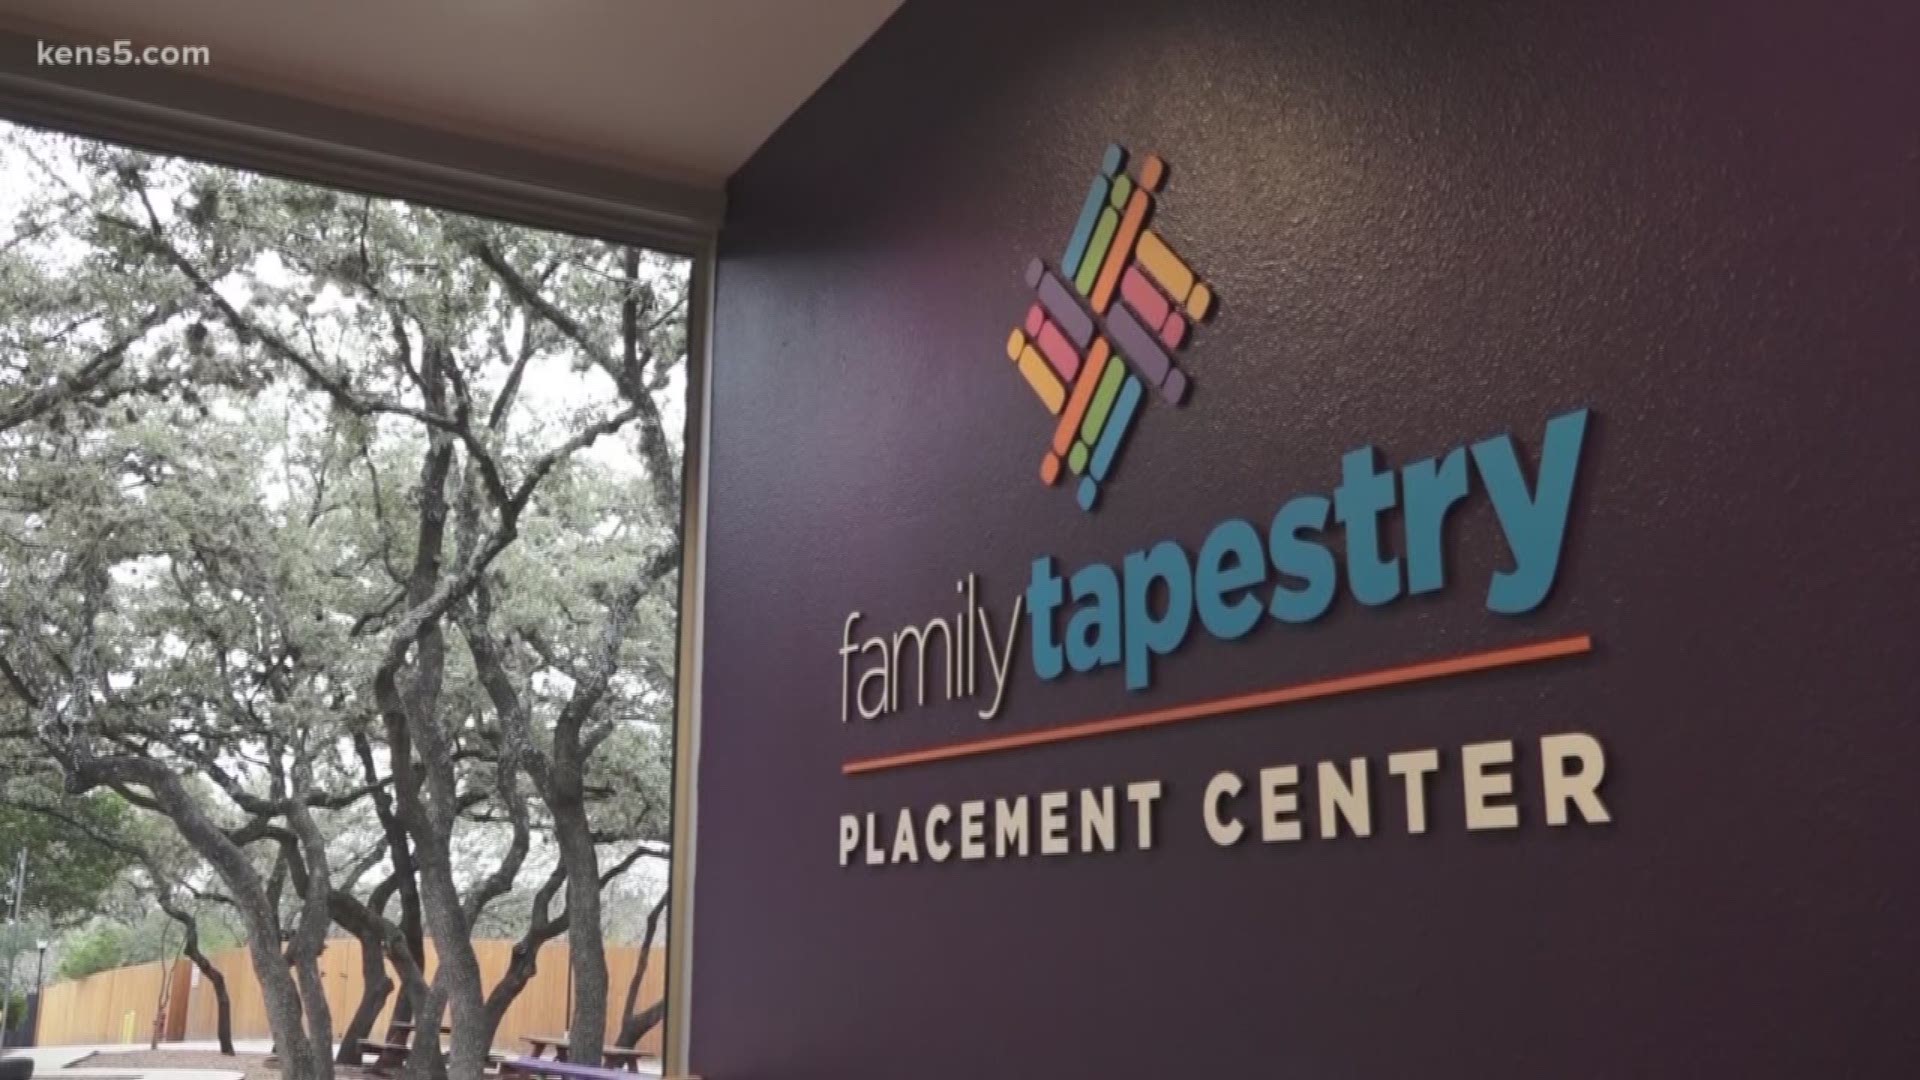 The Family Tapestry Program will be leading the community's efforts in finding homes for foster children.